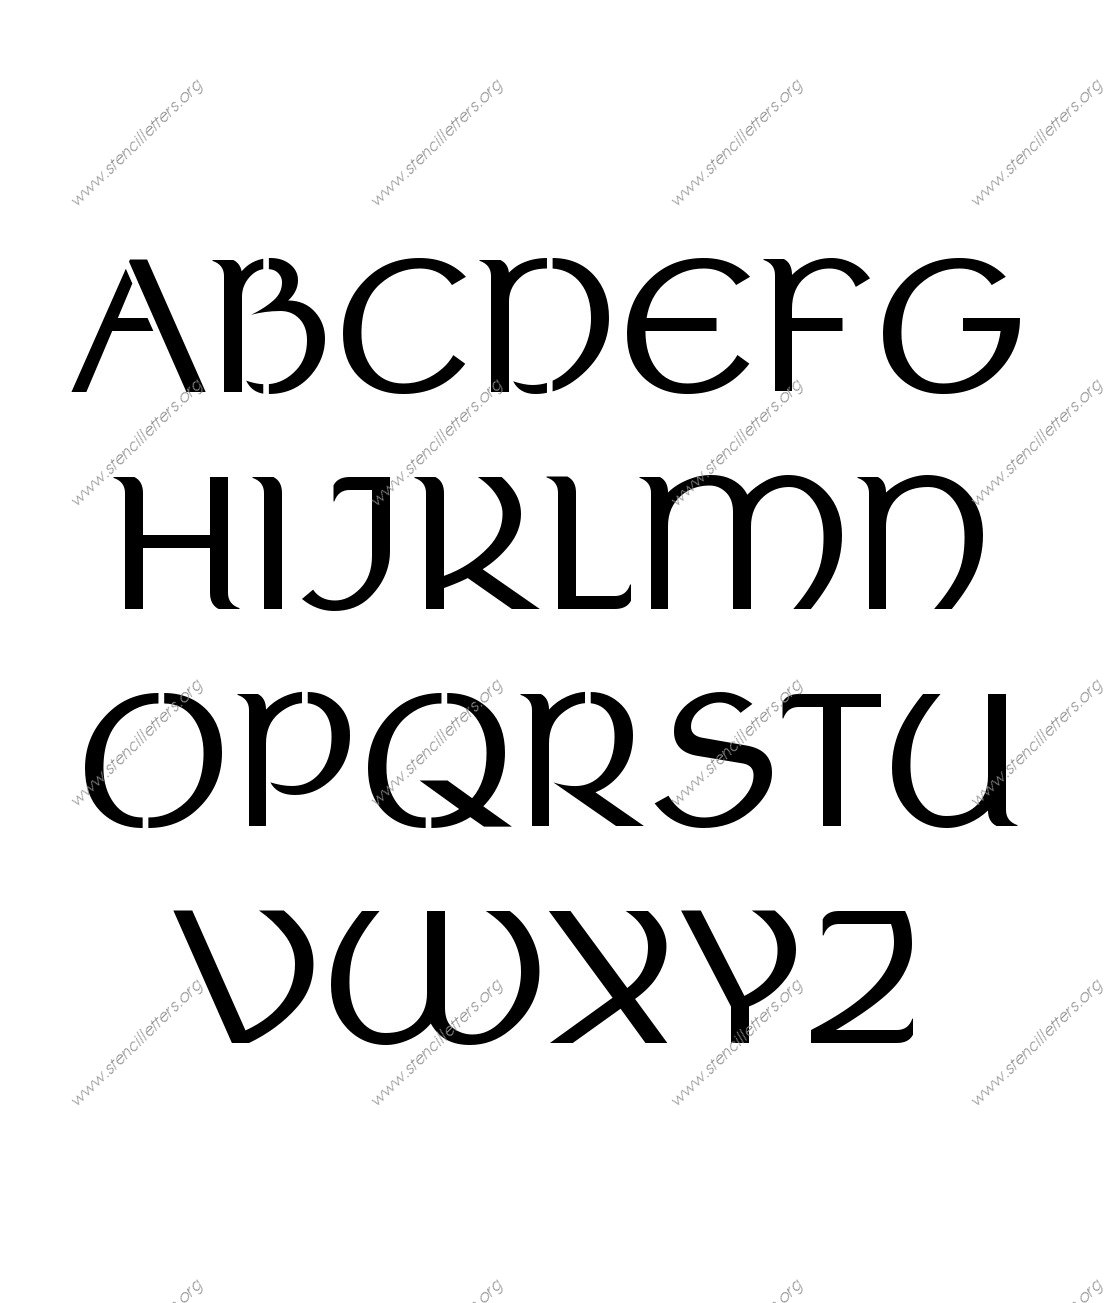 Ancient Celtic A to Z uppercase letter stencils